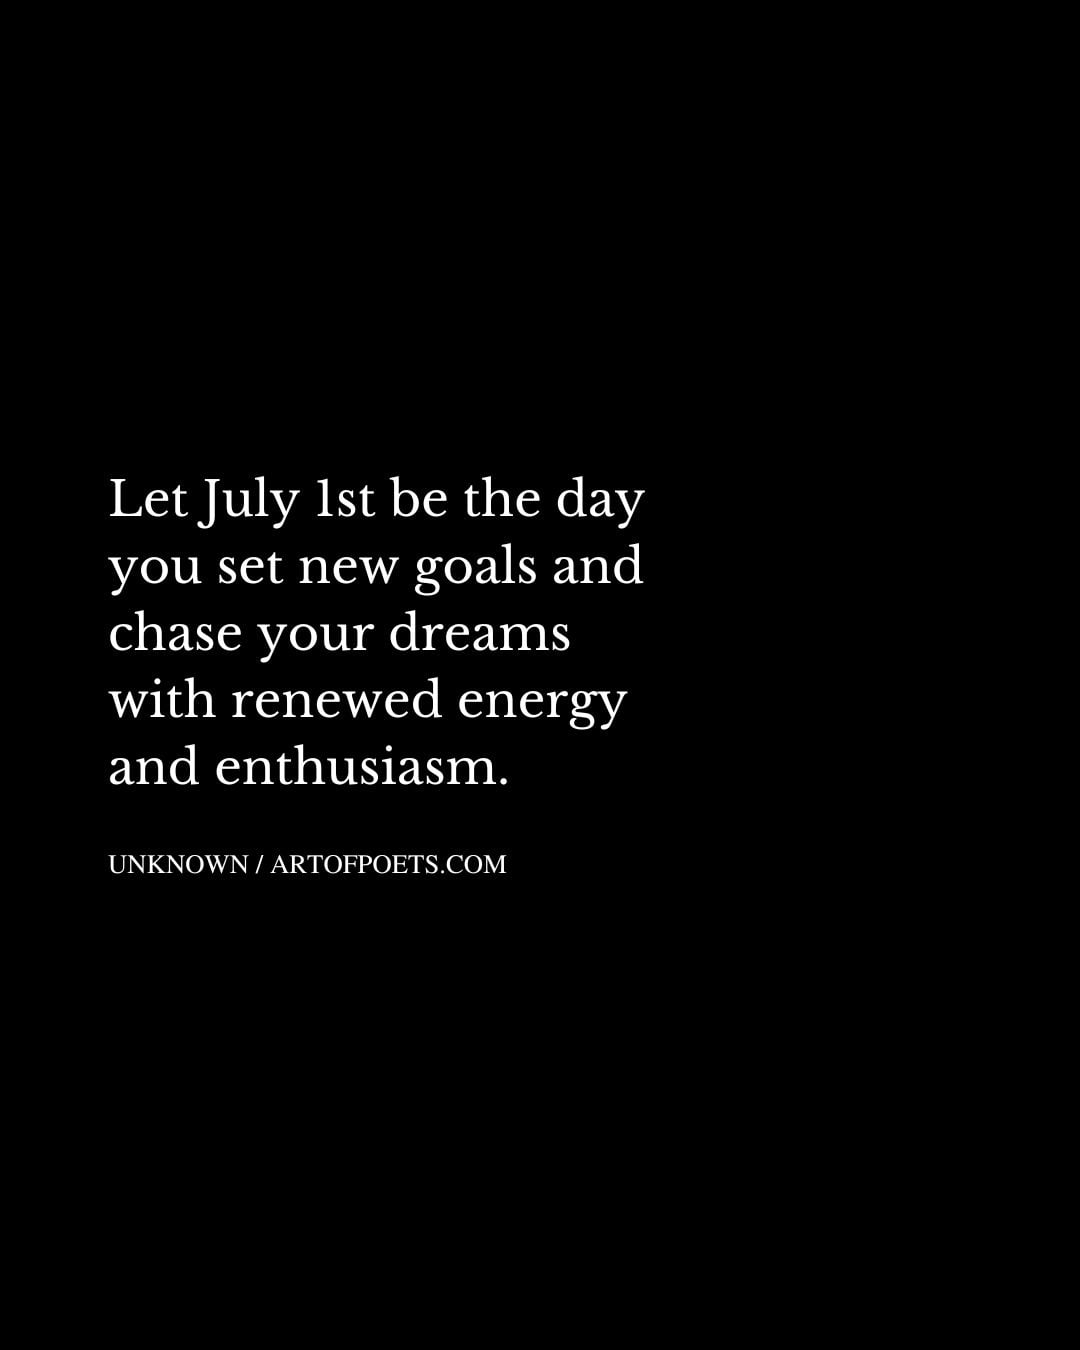 Let July 1st be the day you set new goals and chase your dreams with renewed energy and enthusiasm